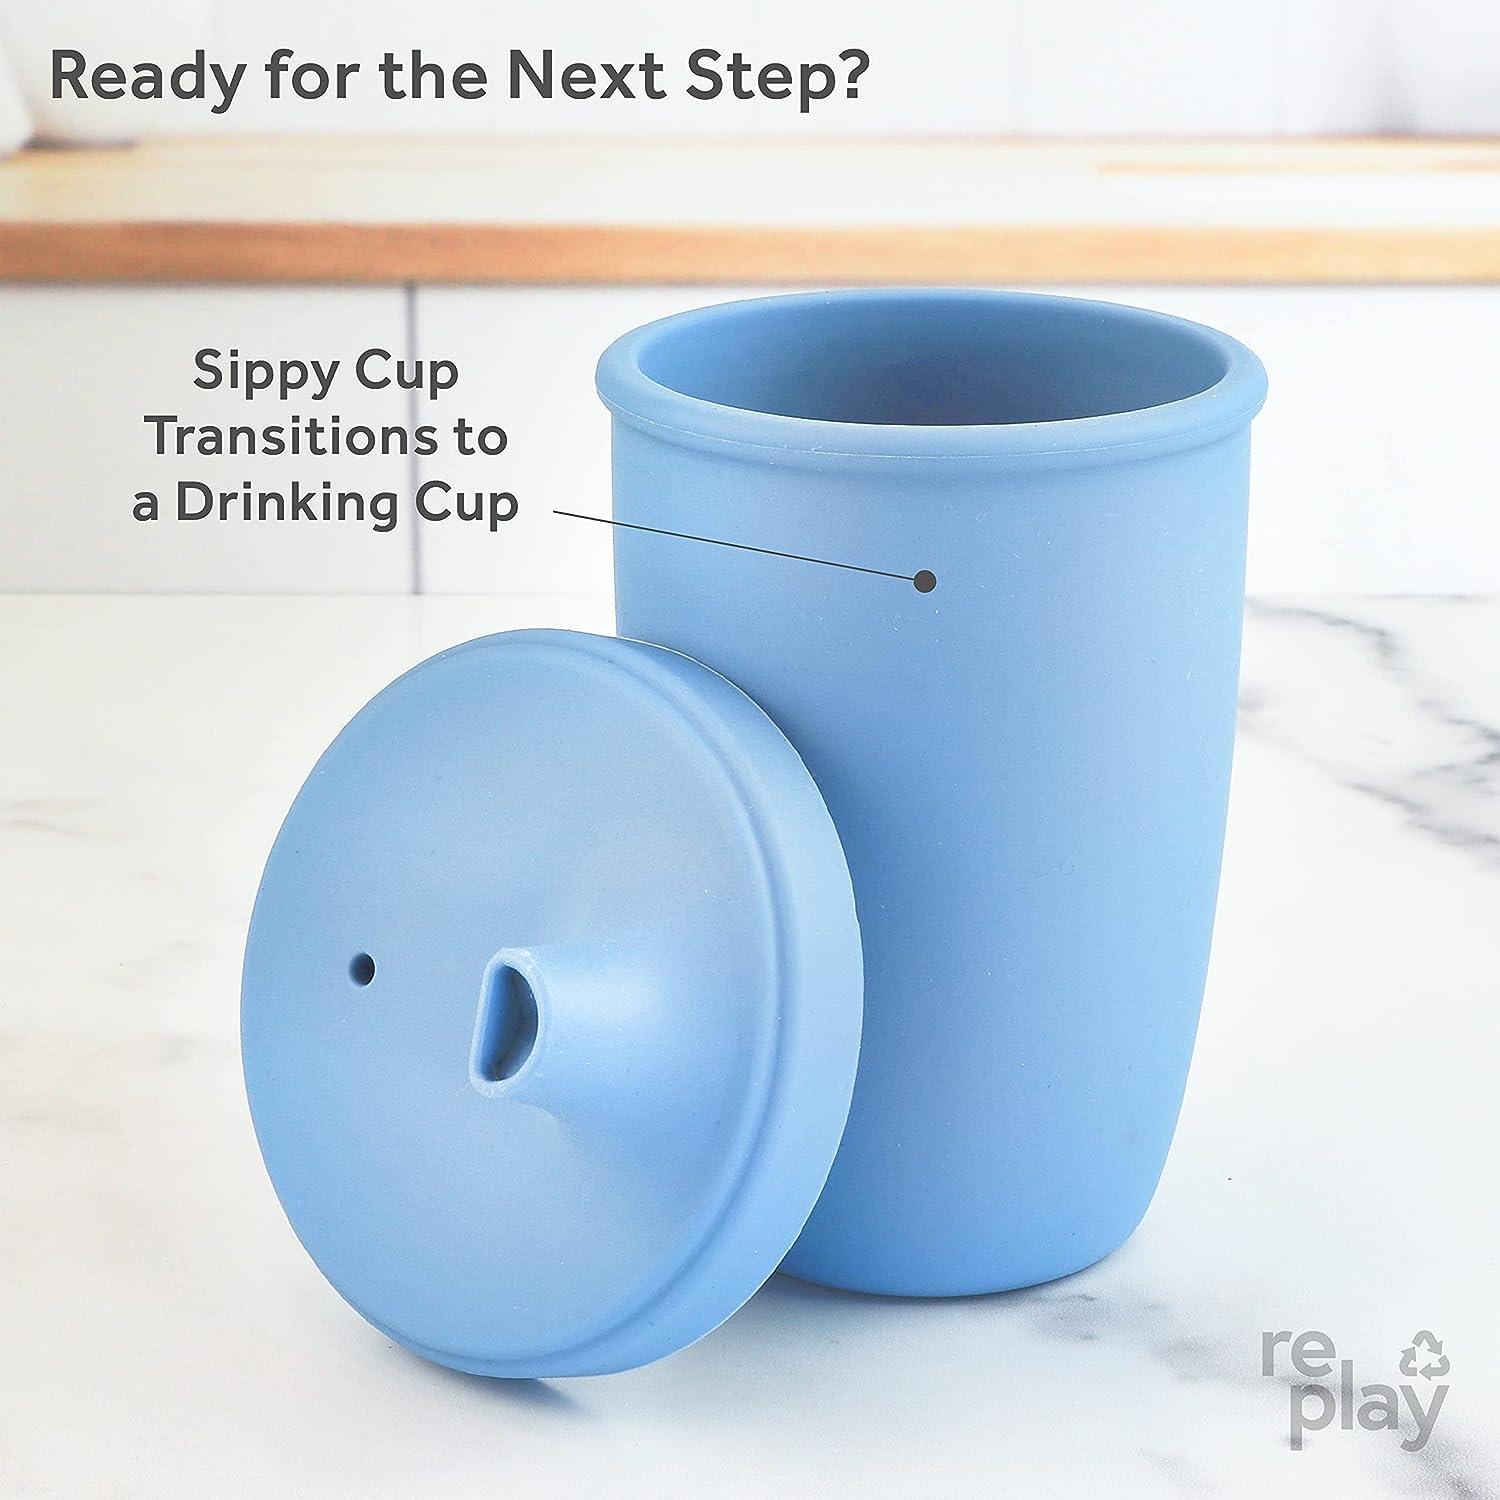 Re-Play Platinum Silicone 8oz. Sippy Cup - Denim